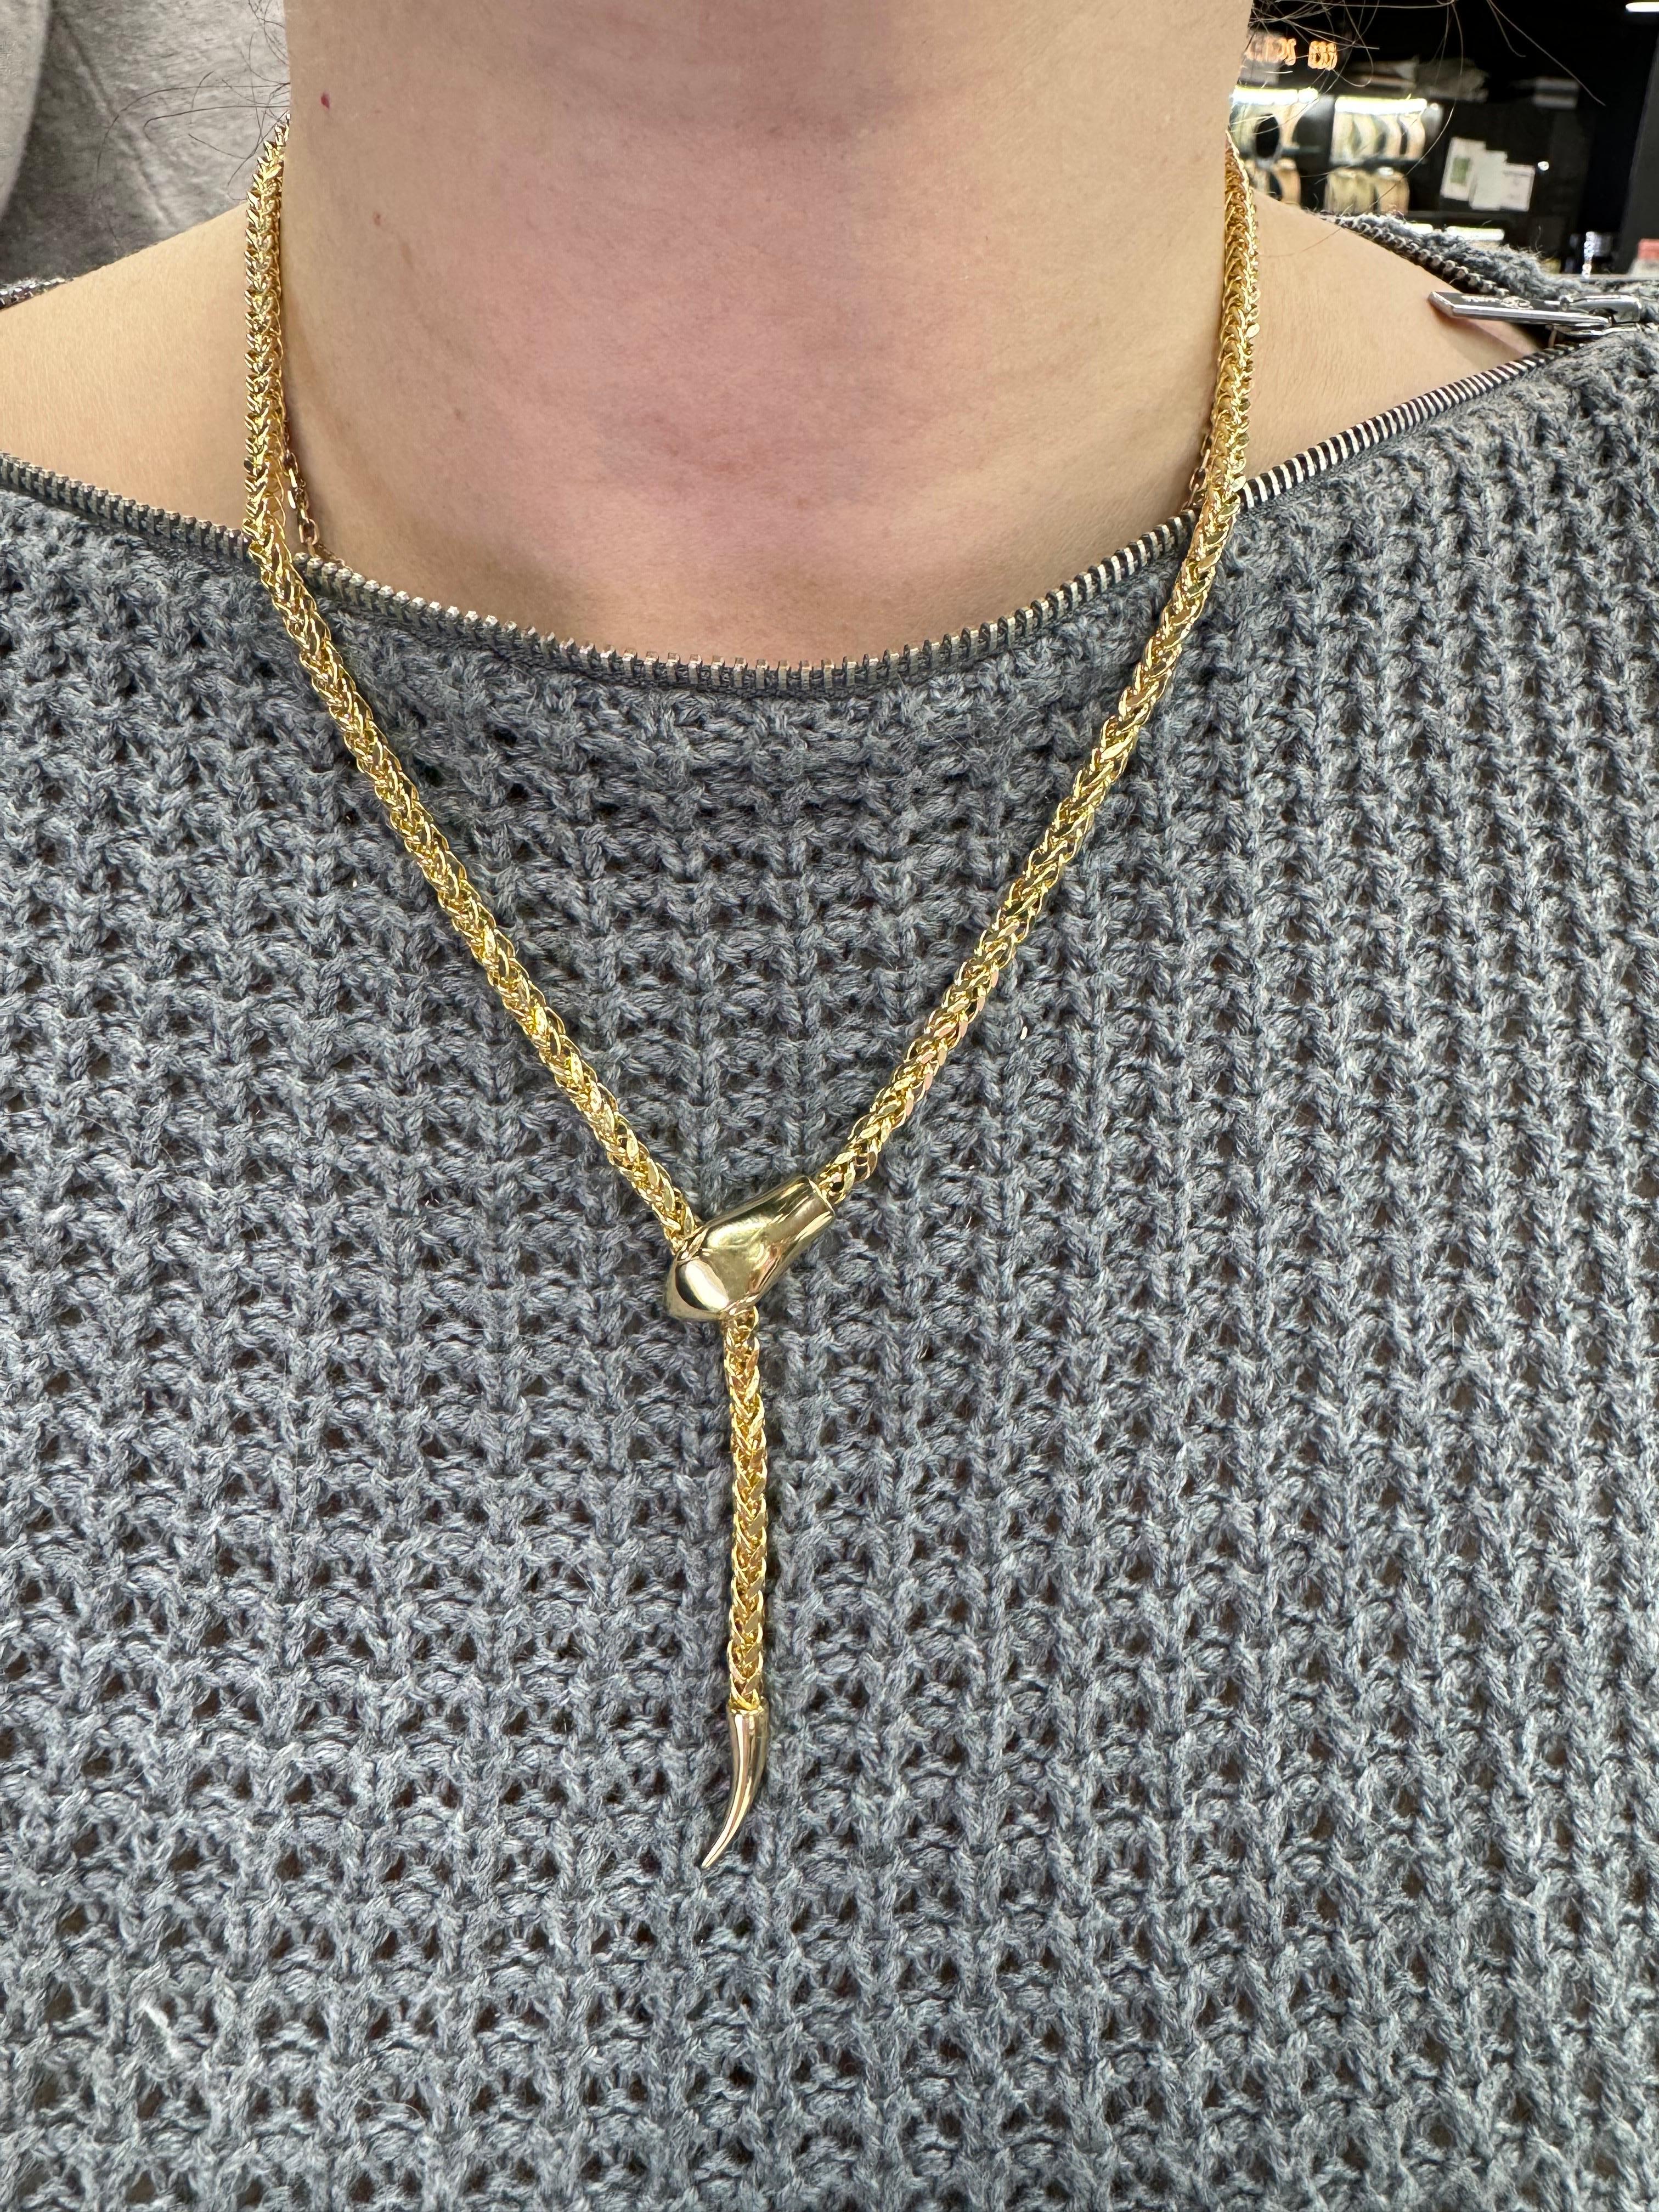 Made in Italy, this necklace features a snake motif making the lariat adjustable, in 14 karat yellow gold. 
Can be worn as a choker or longer. 

Available in three different sizes. 
DM for more info and pictures. 